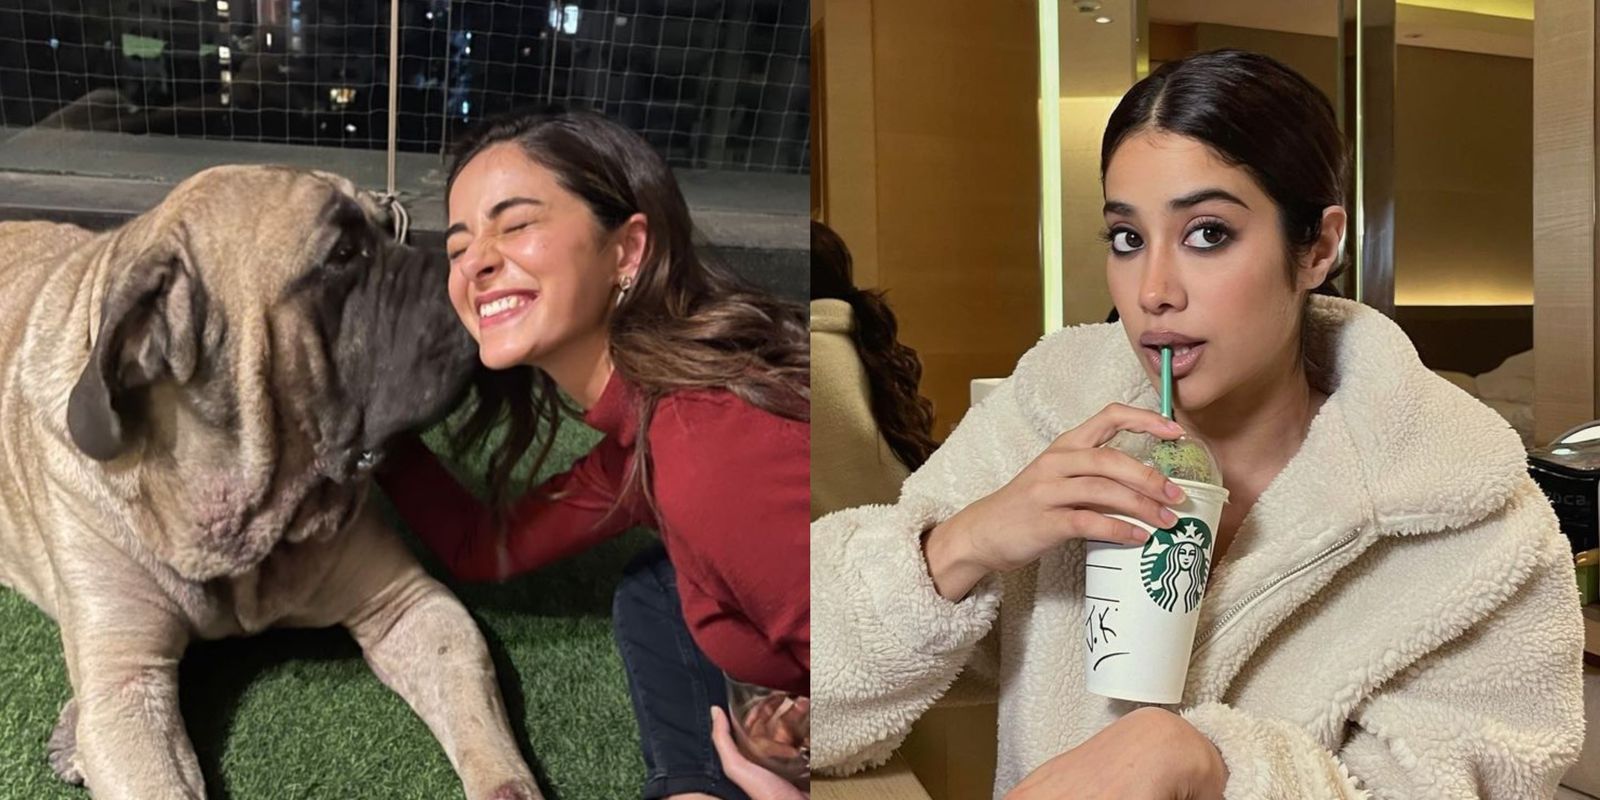 Alia Clicks A Cute Picture Of Ananya With Ranbir’s Dog; Janhvi Shares A Glimpse Of ‘Work From Home’